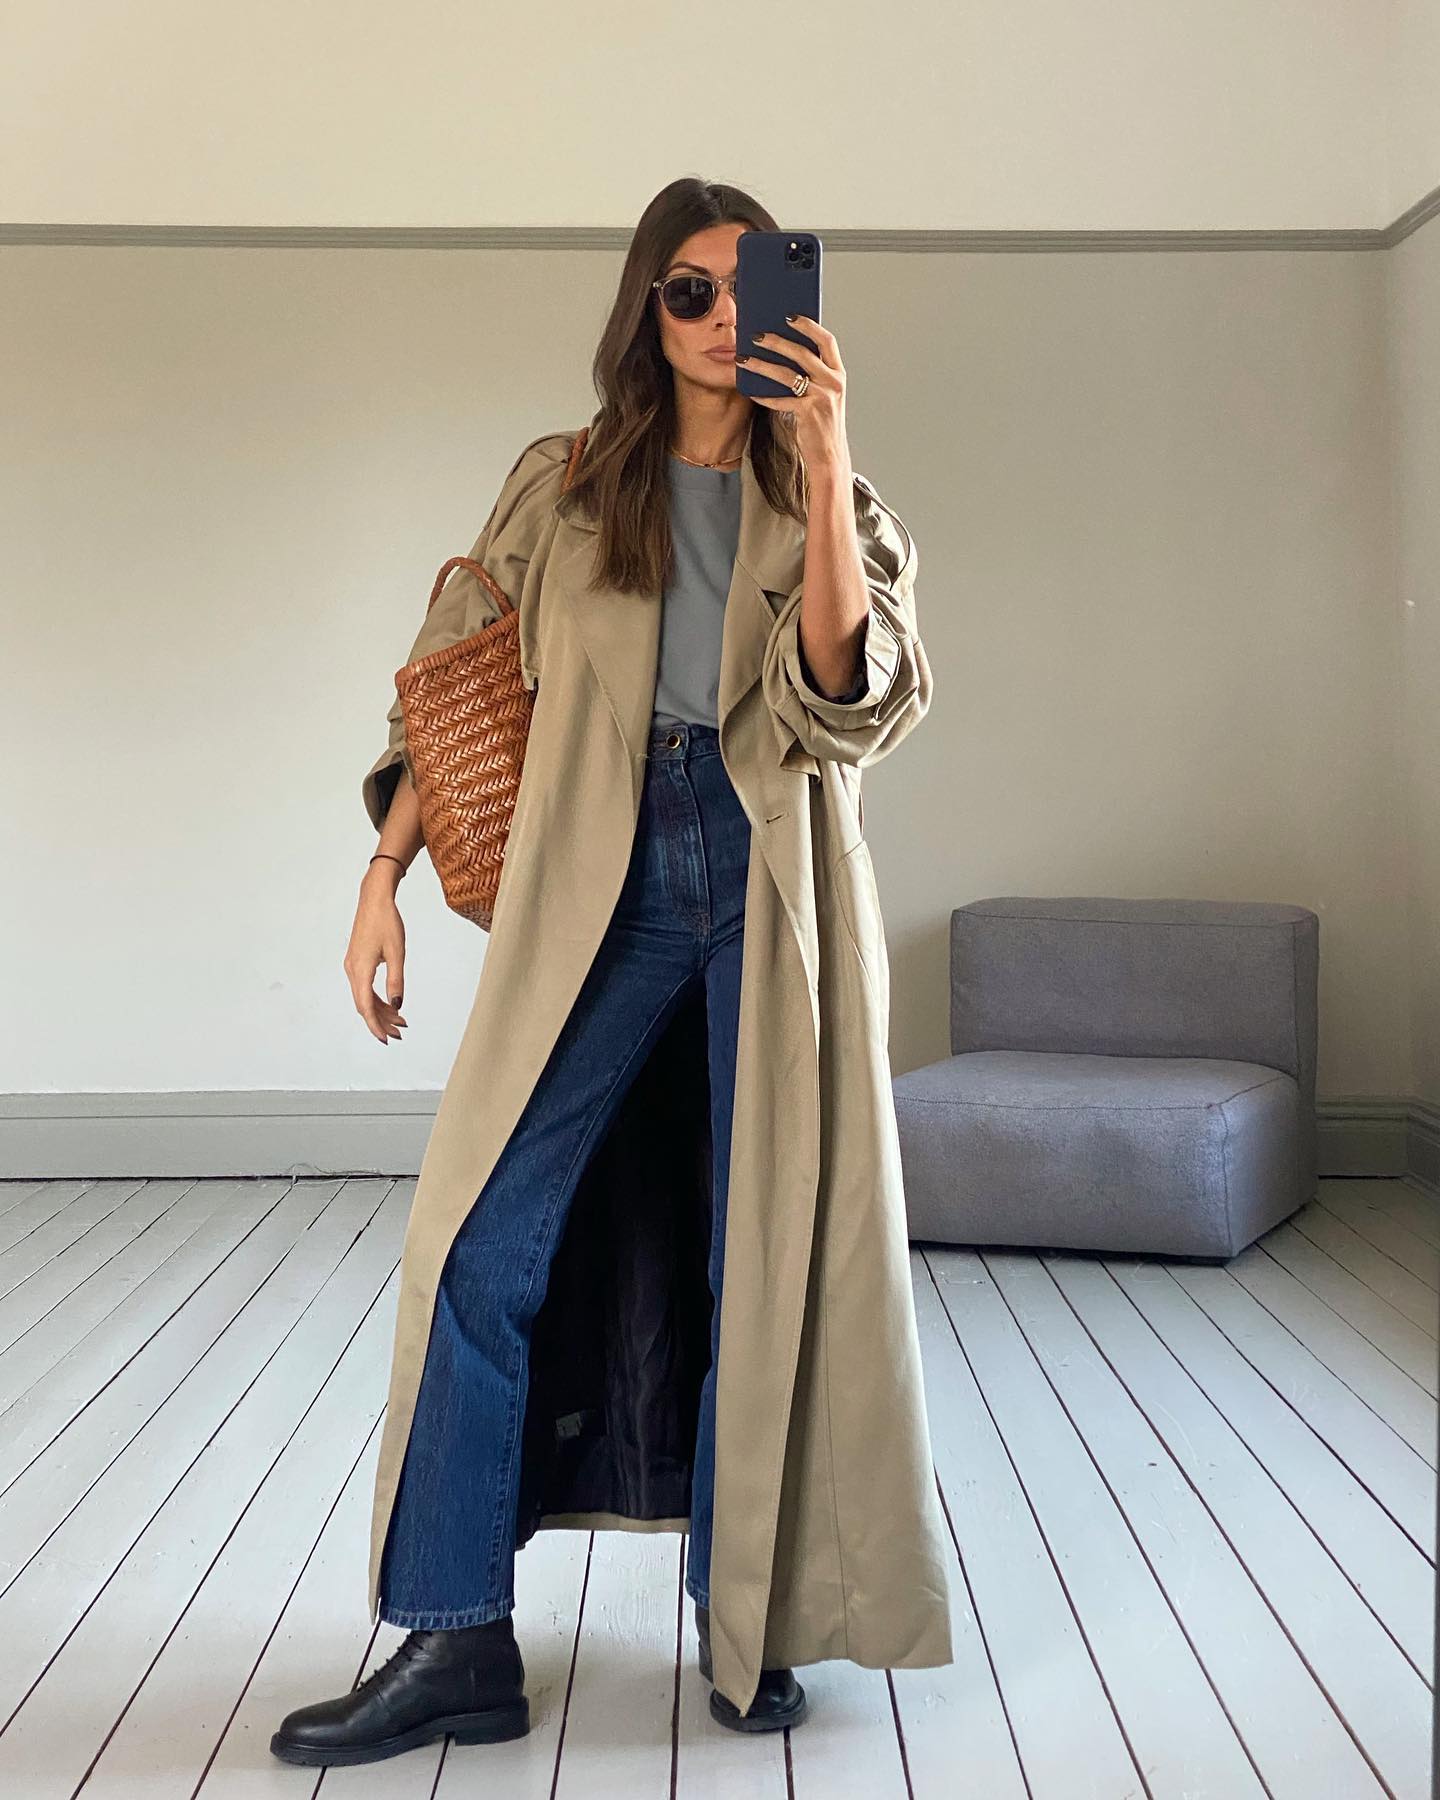 fashion influencer Marianne Smyth posing in a spring outfit with a long trench coat and jeans